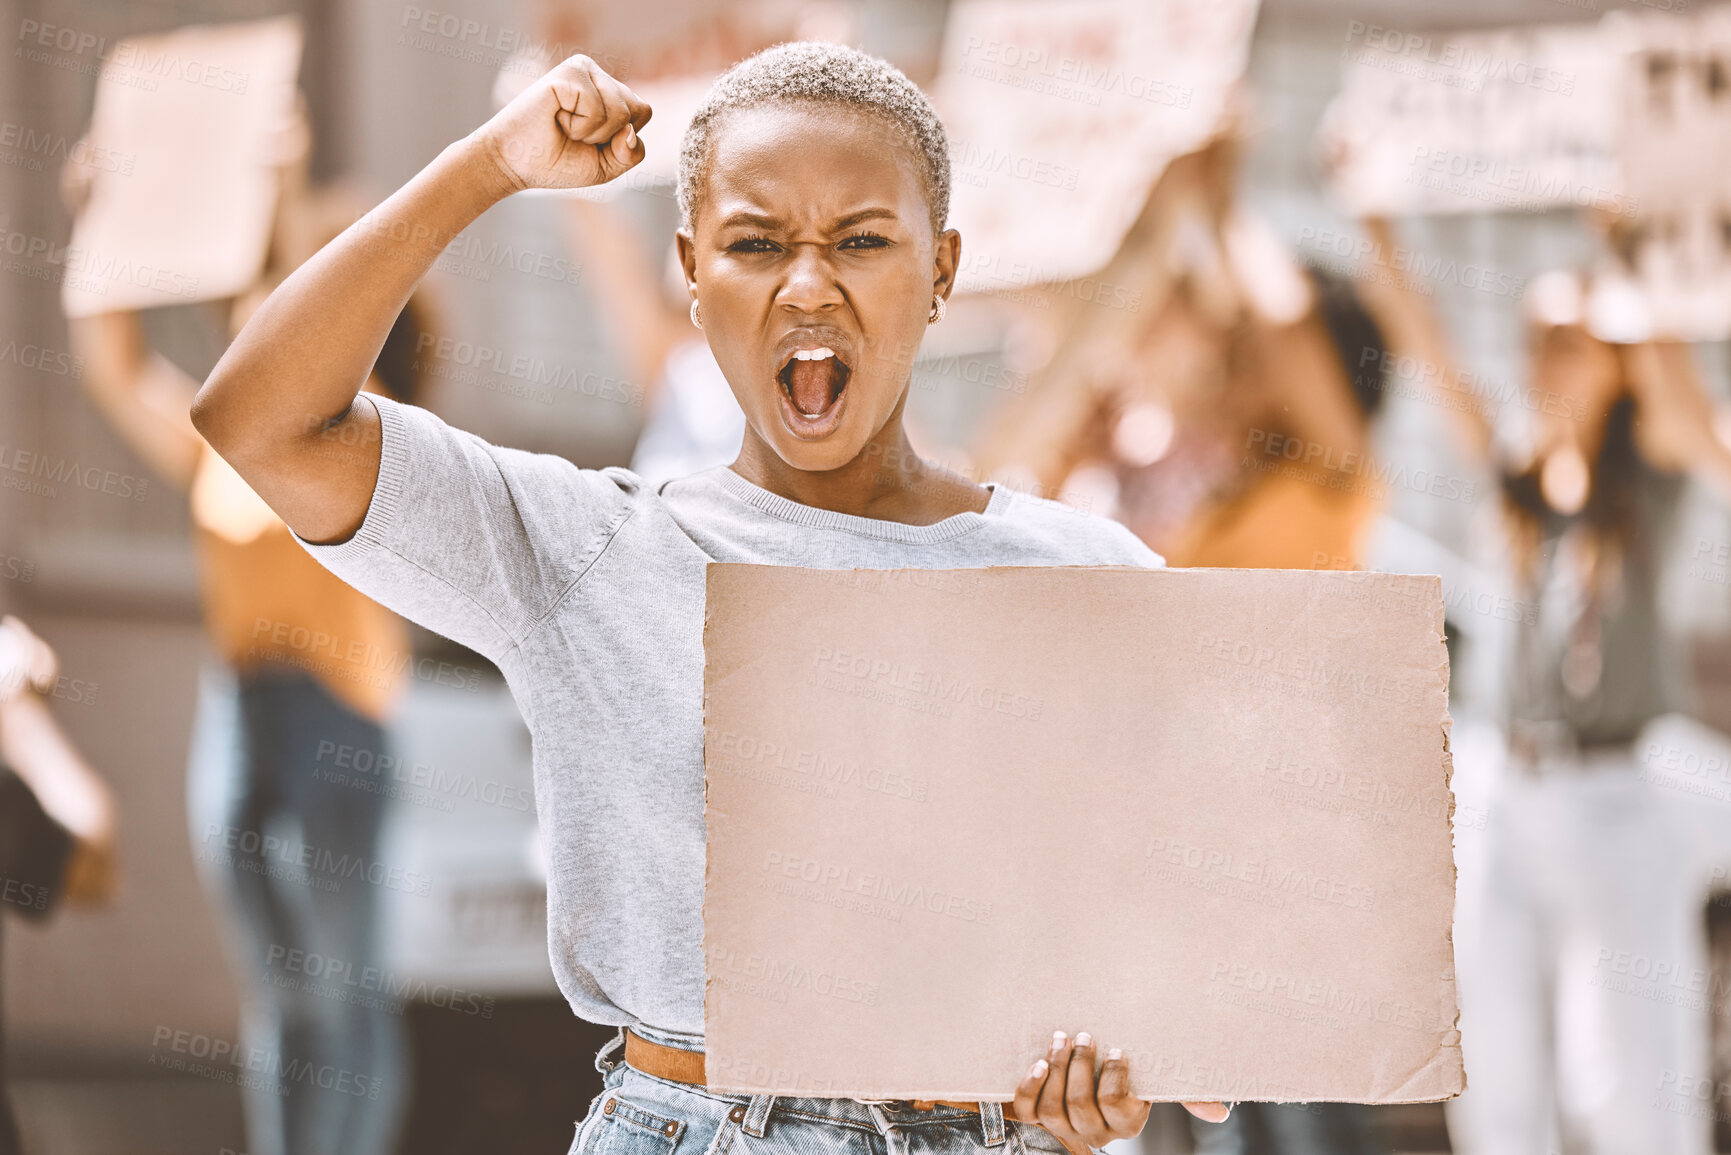 Buy stock photo Protest cardboard mock up and black woman in crowd or street portrait with gender equality, human rights and justice with voice and power. Law, politics and activism mockup sign for women empowerment